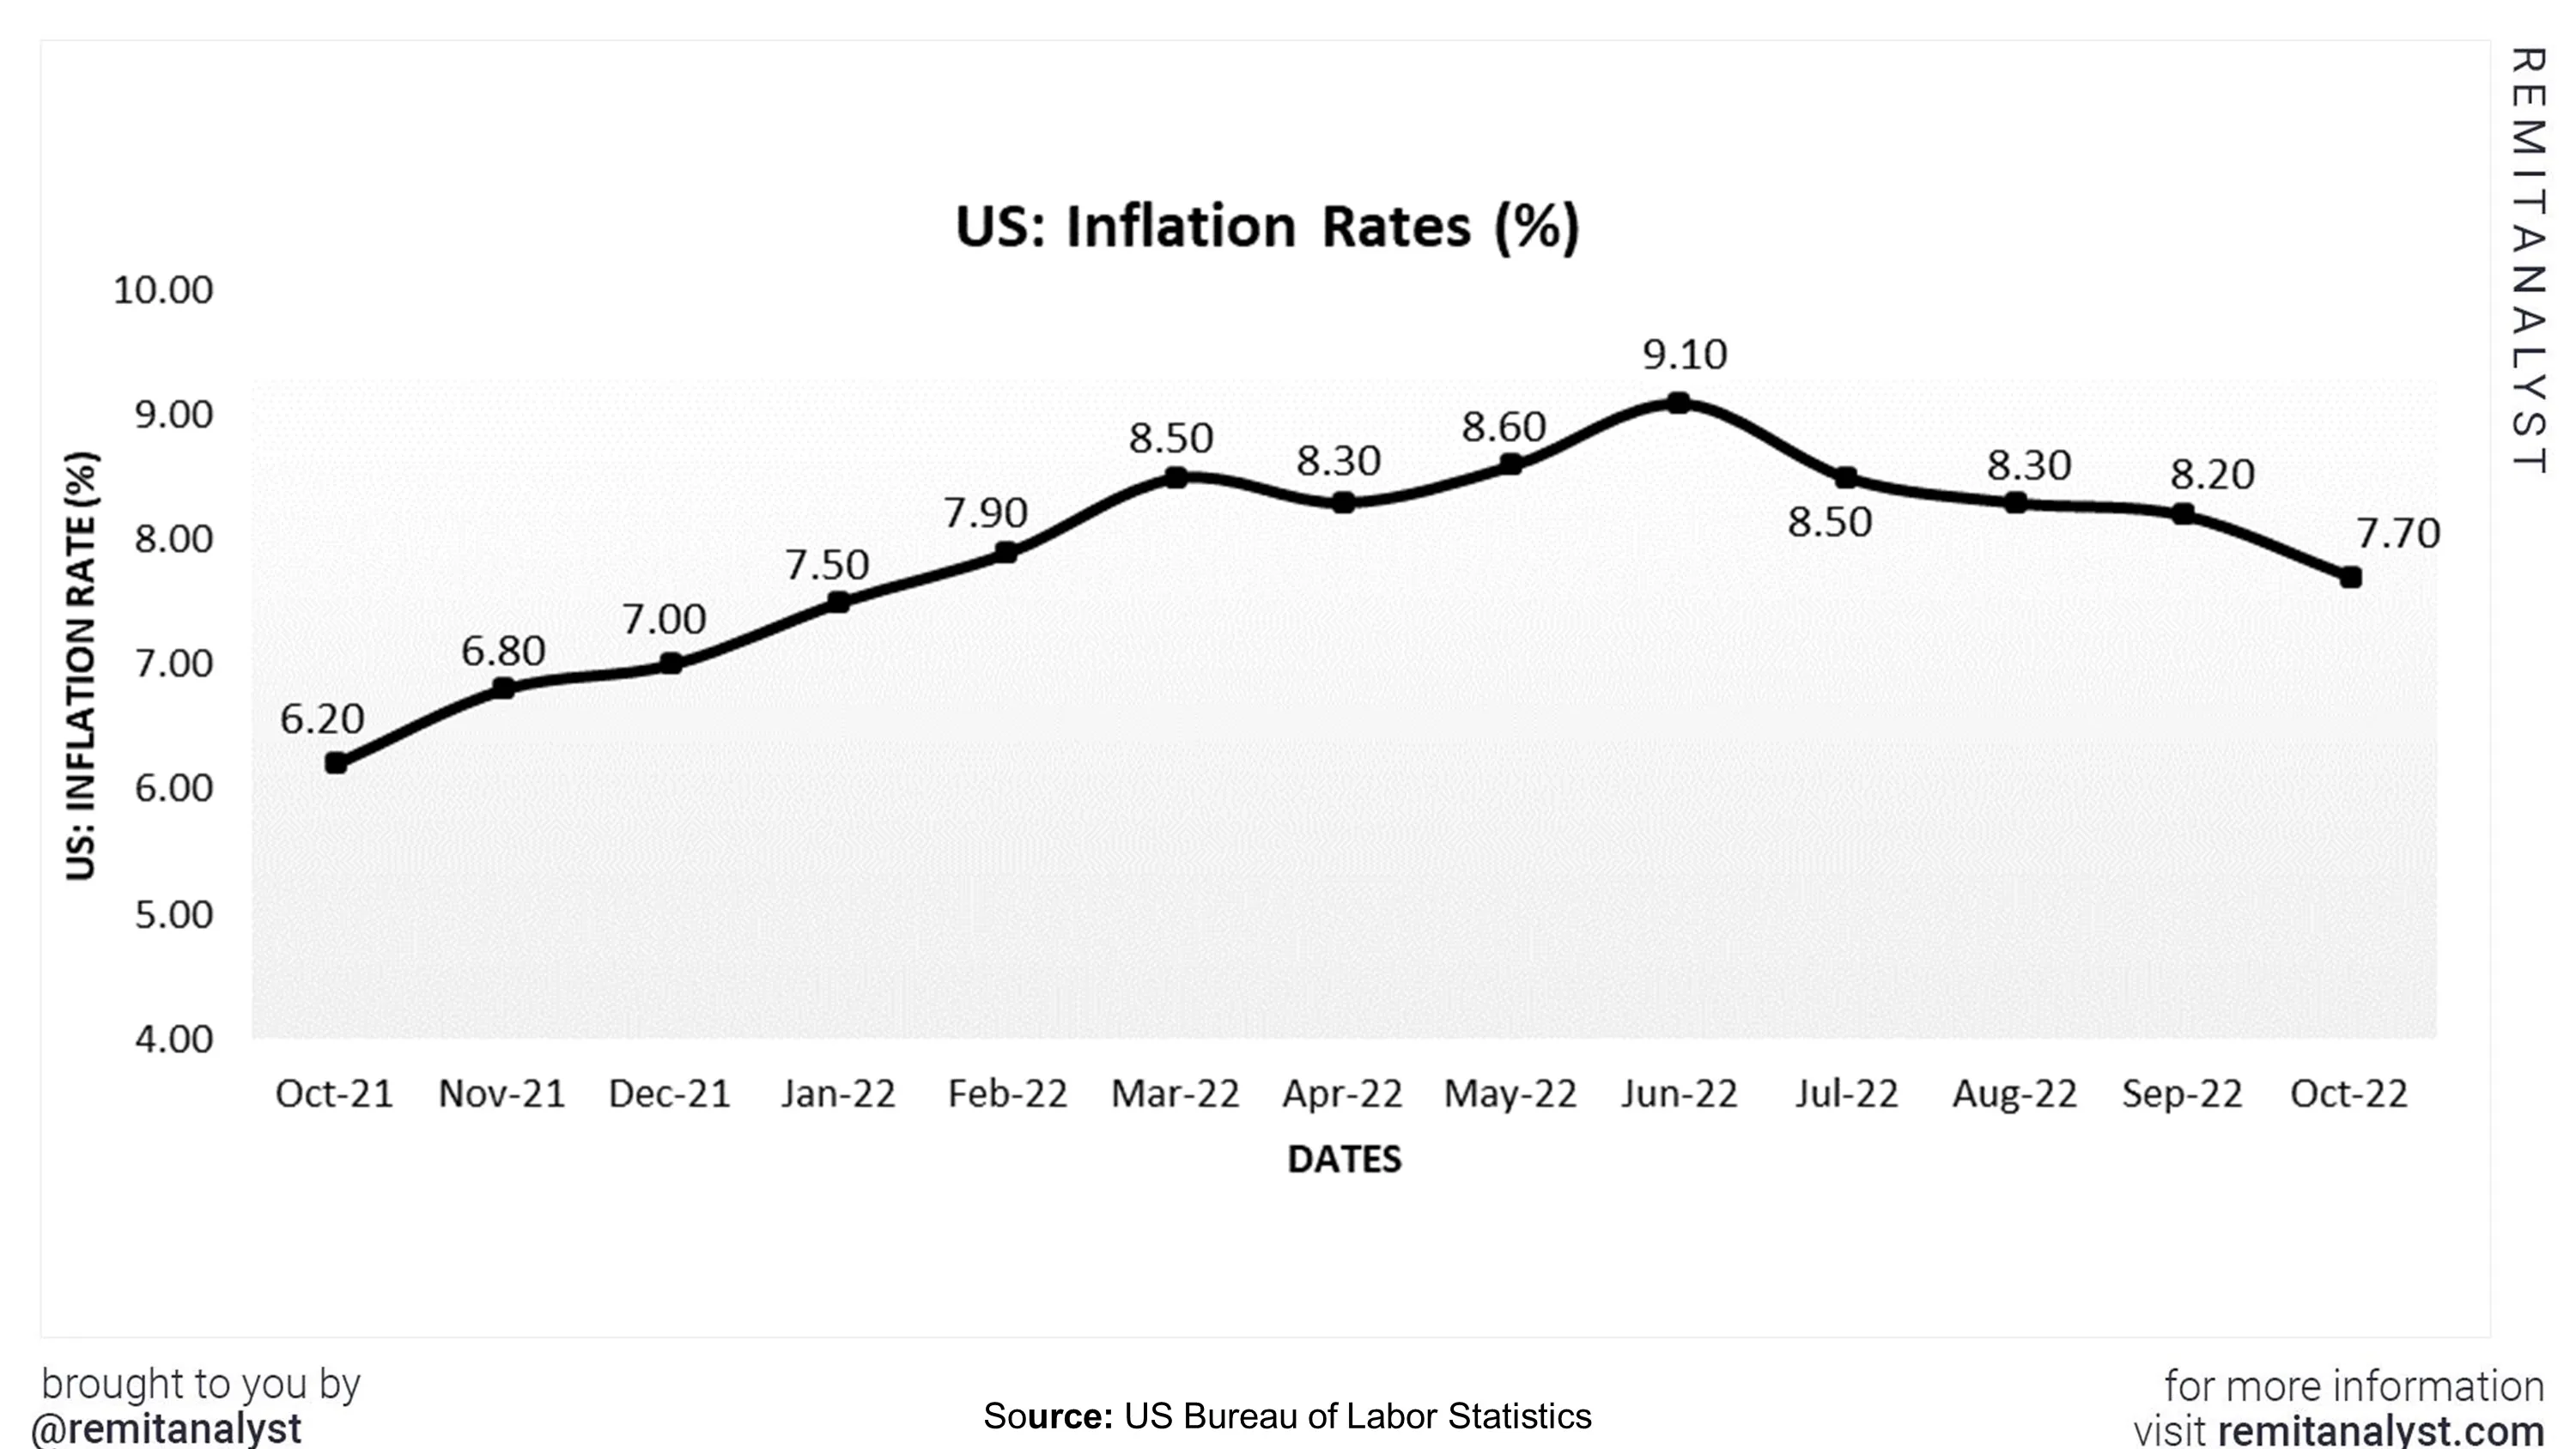 inflation-rates-in-us-from-oct-2021-to-oct-2022